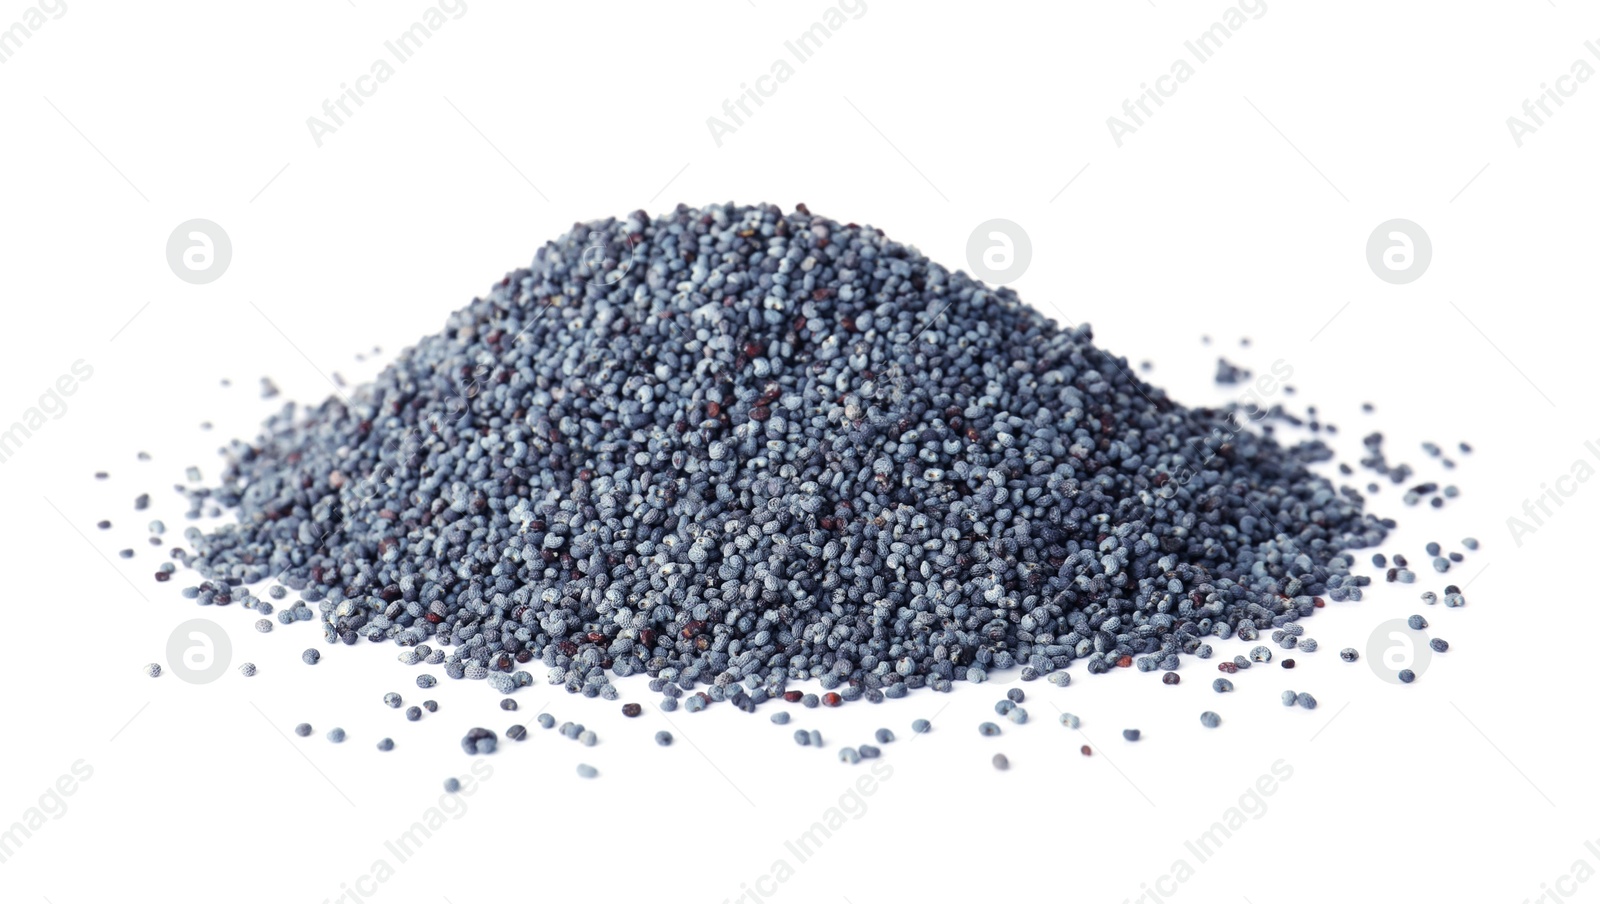 Photo of Heap of poppy seeds on white background